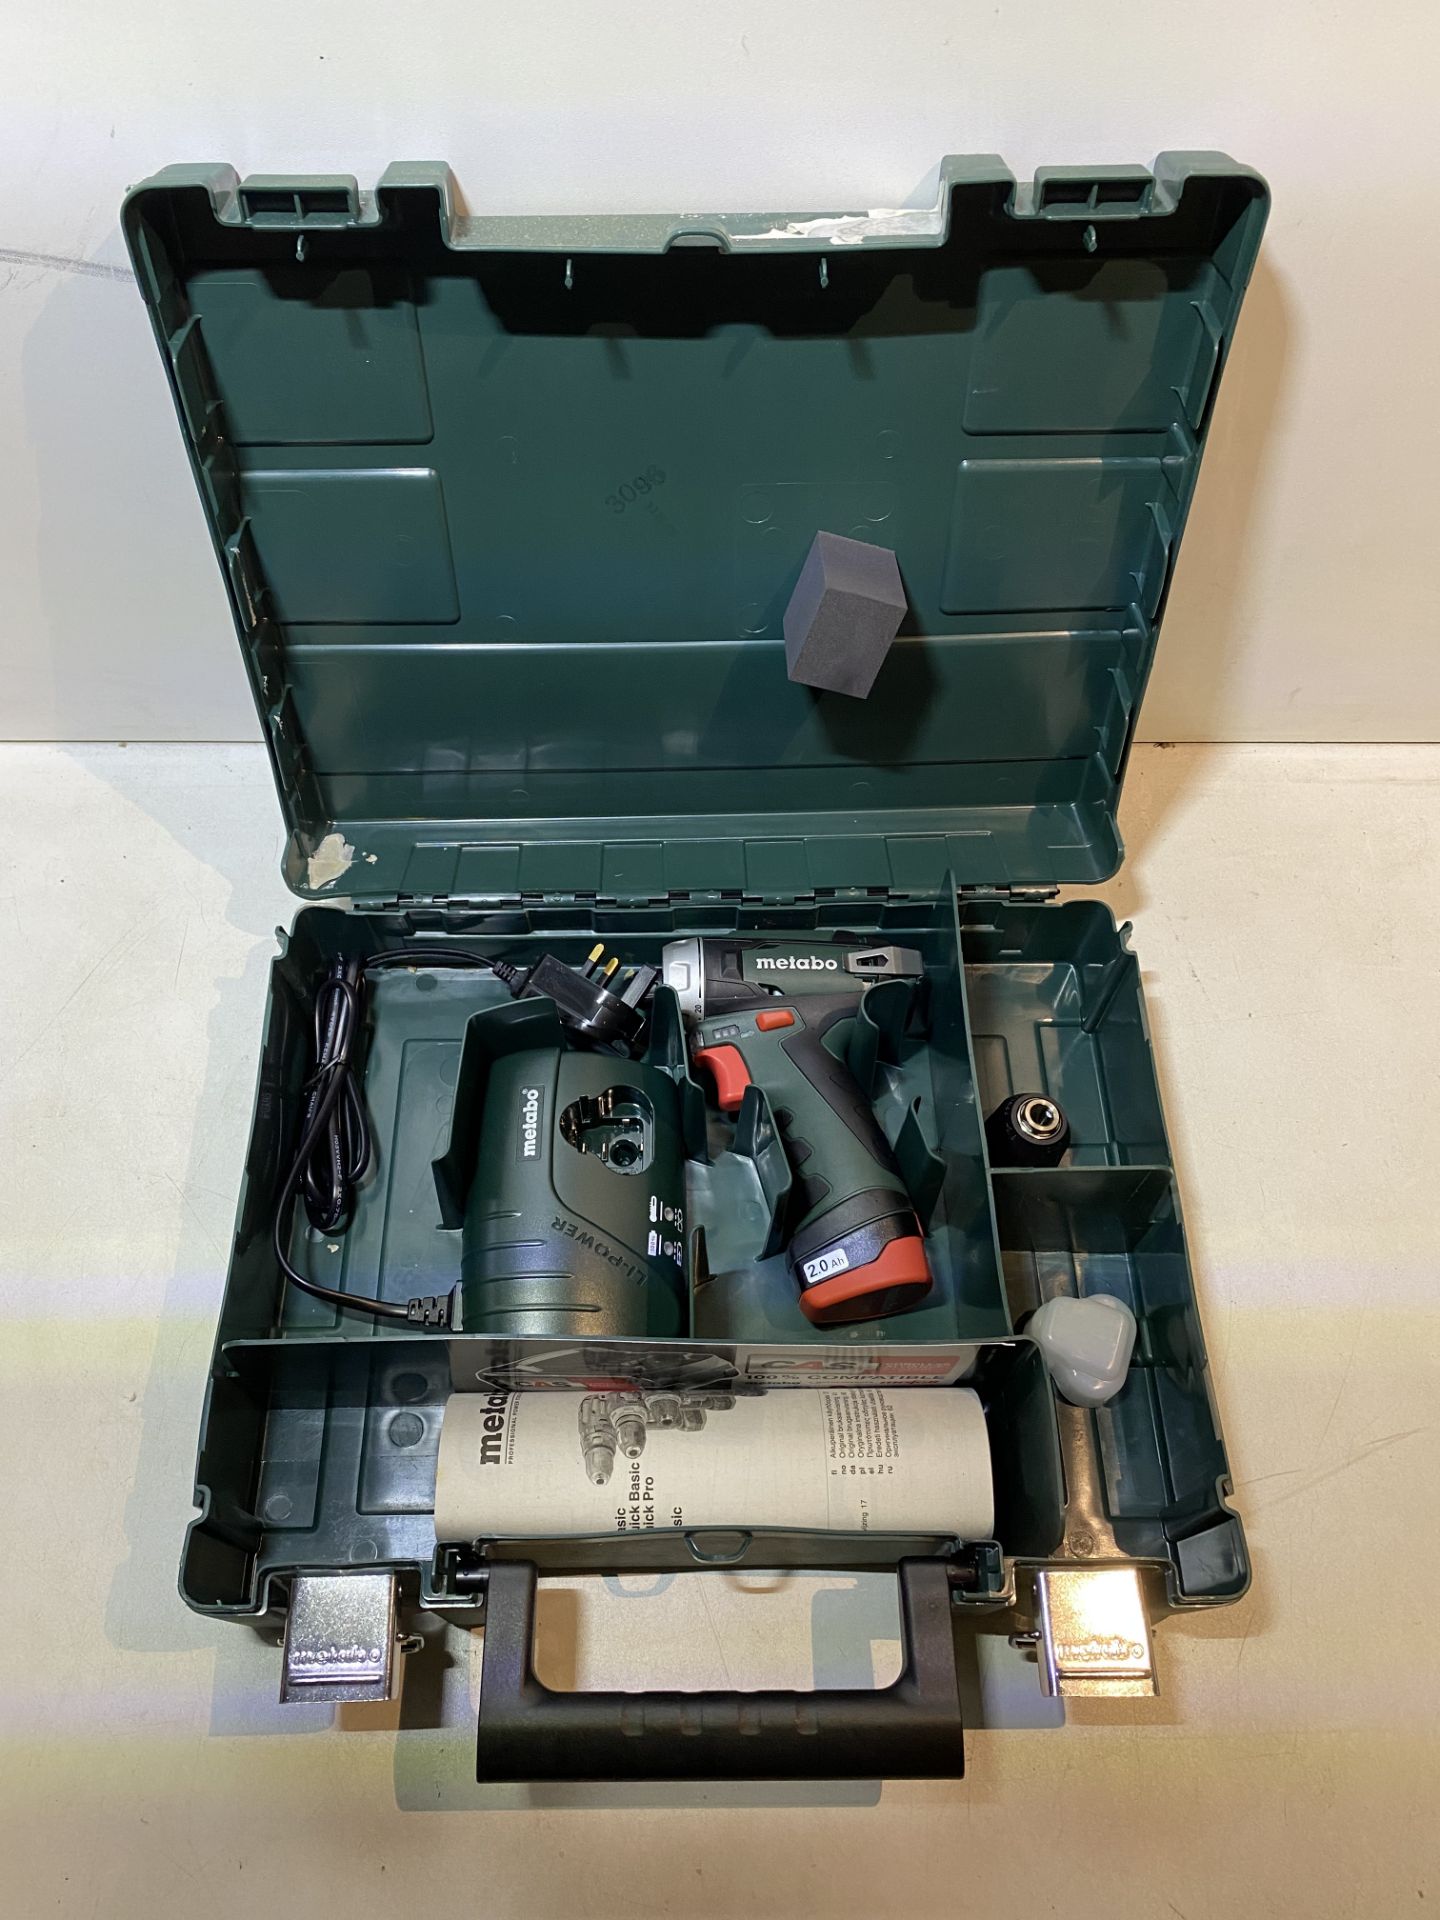 Metabo 600080500 Power Maxx BS Basic Cordless Drill/Screwdriver 10.8v - See Pictures